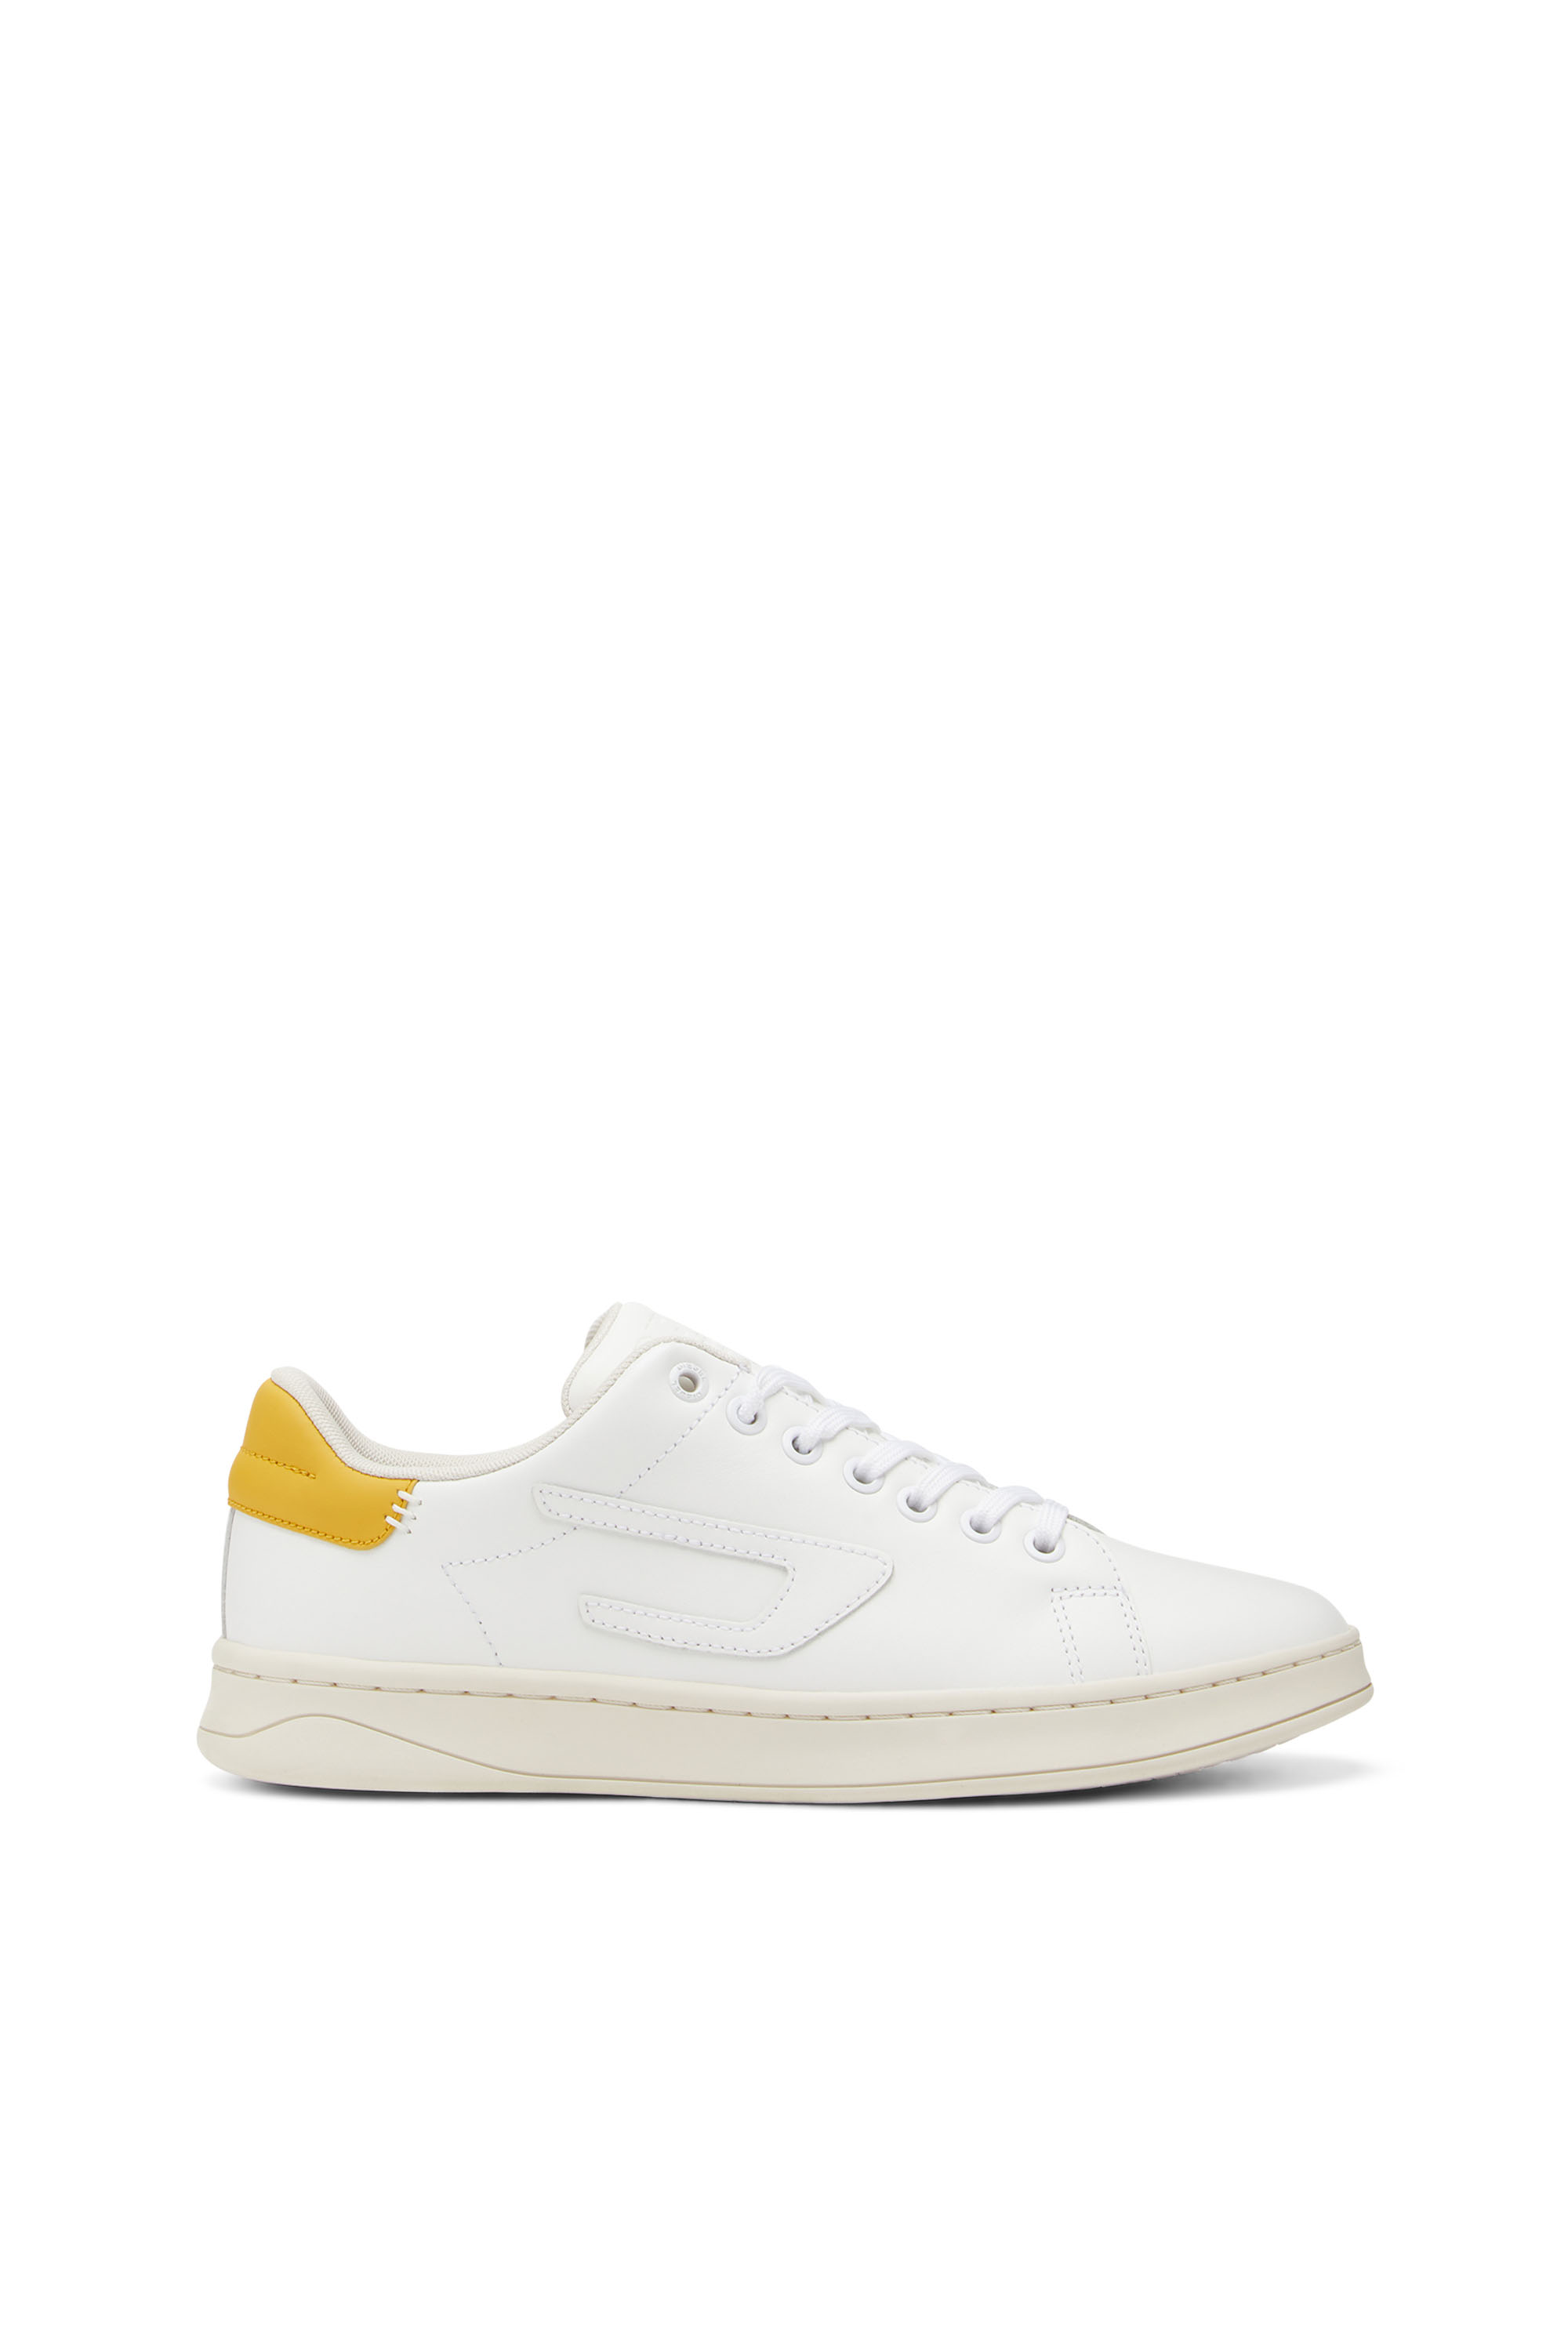 Diesel Low-top Leather Sneakers With D Patch In White